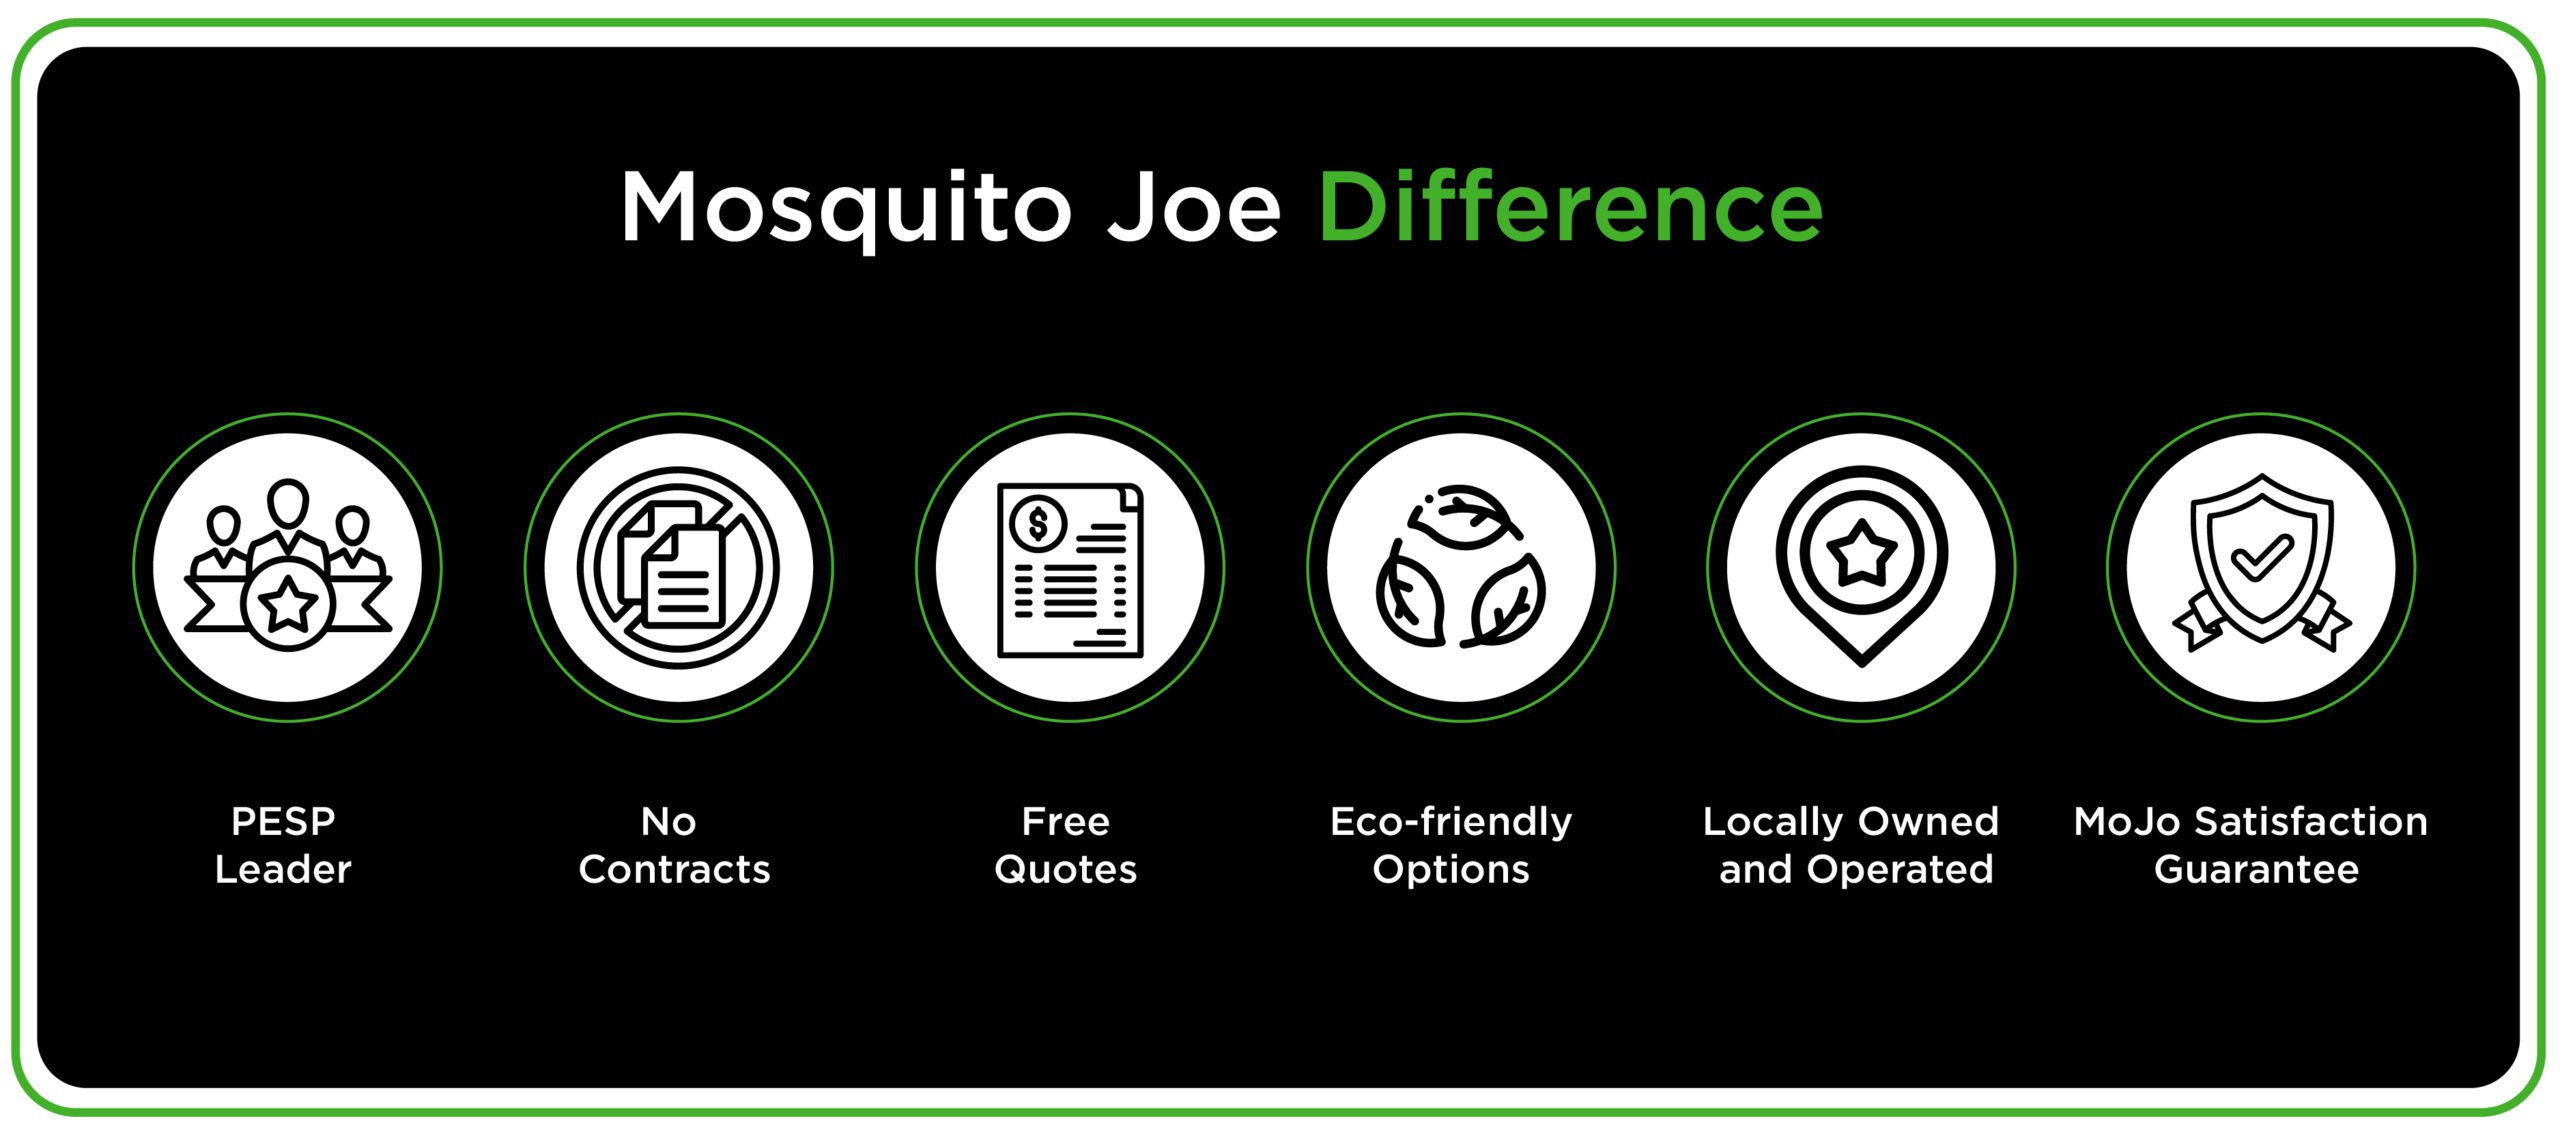 Mosquito Joe is a PESP leader, offers free quotes, no contracts, the MoJo Satisfaction Guarantee, locally owned and operated locations, and eco-friendly treatment options.